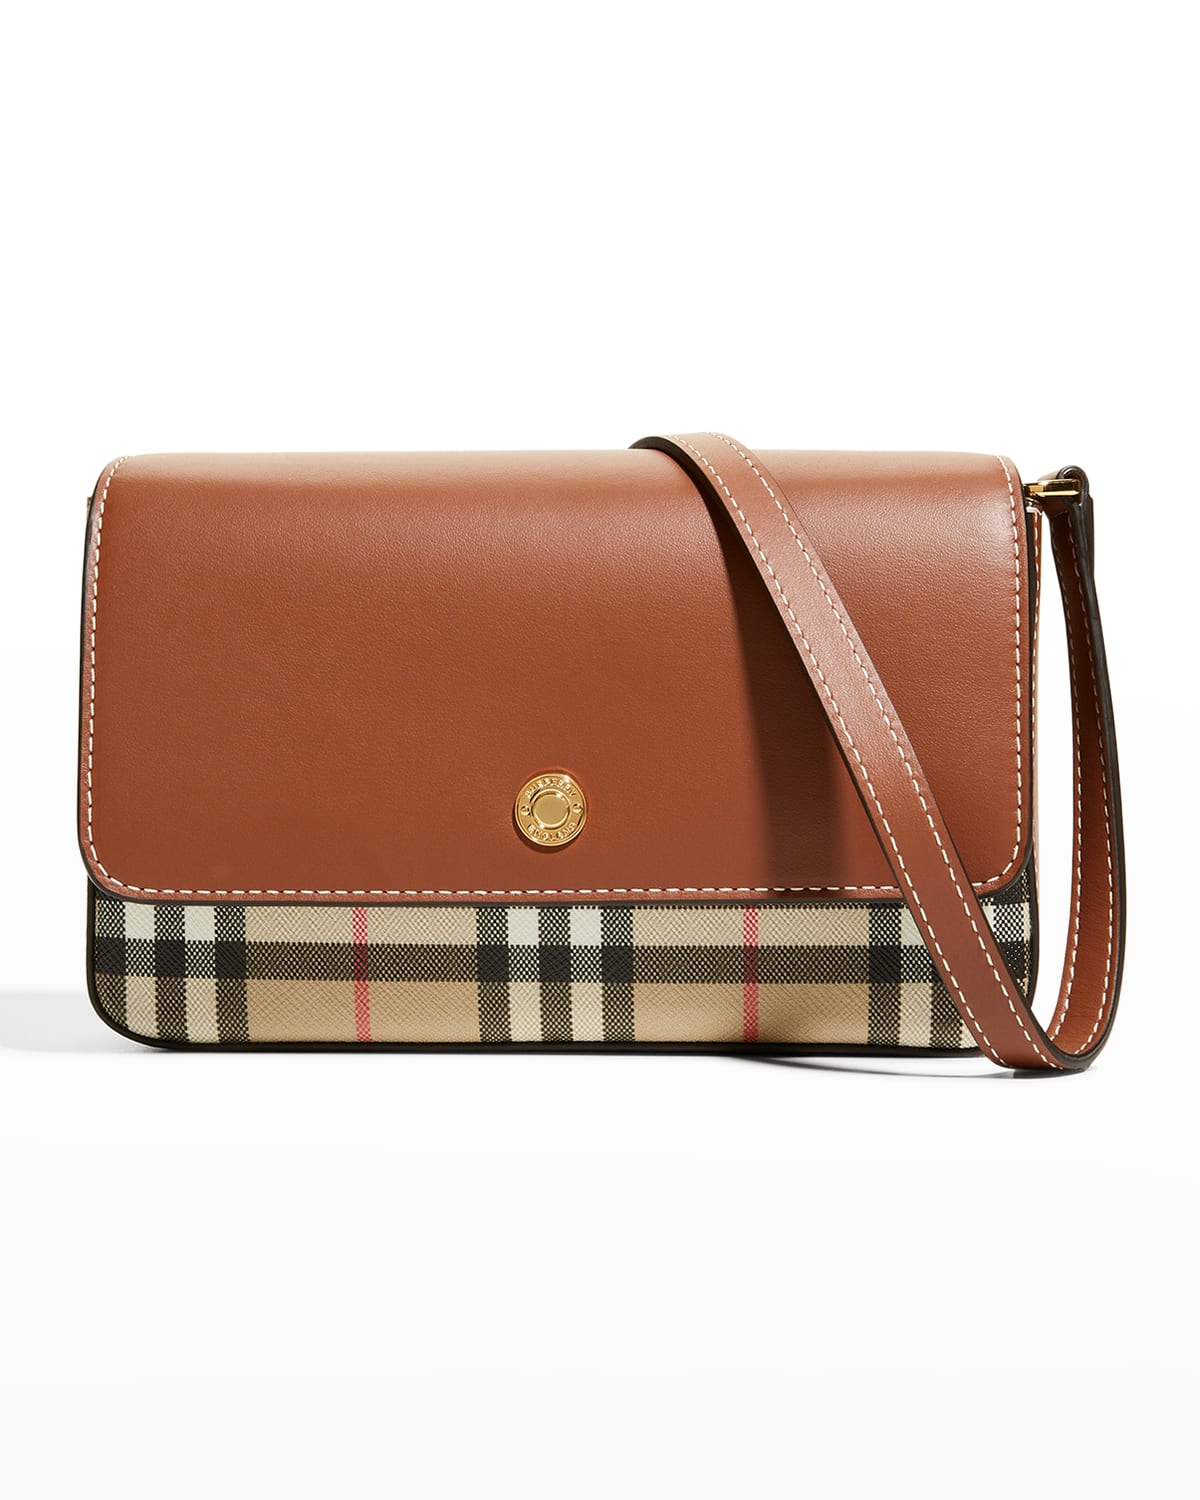 New Hampshire Check Canvas & Leather Crossbody Bag